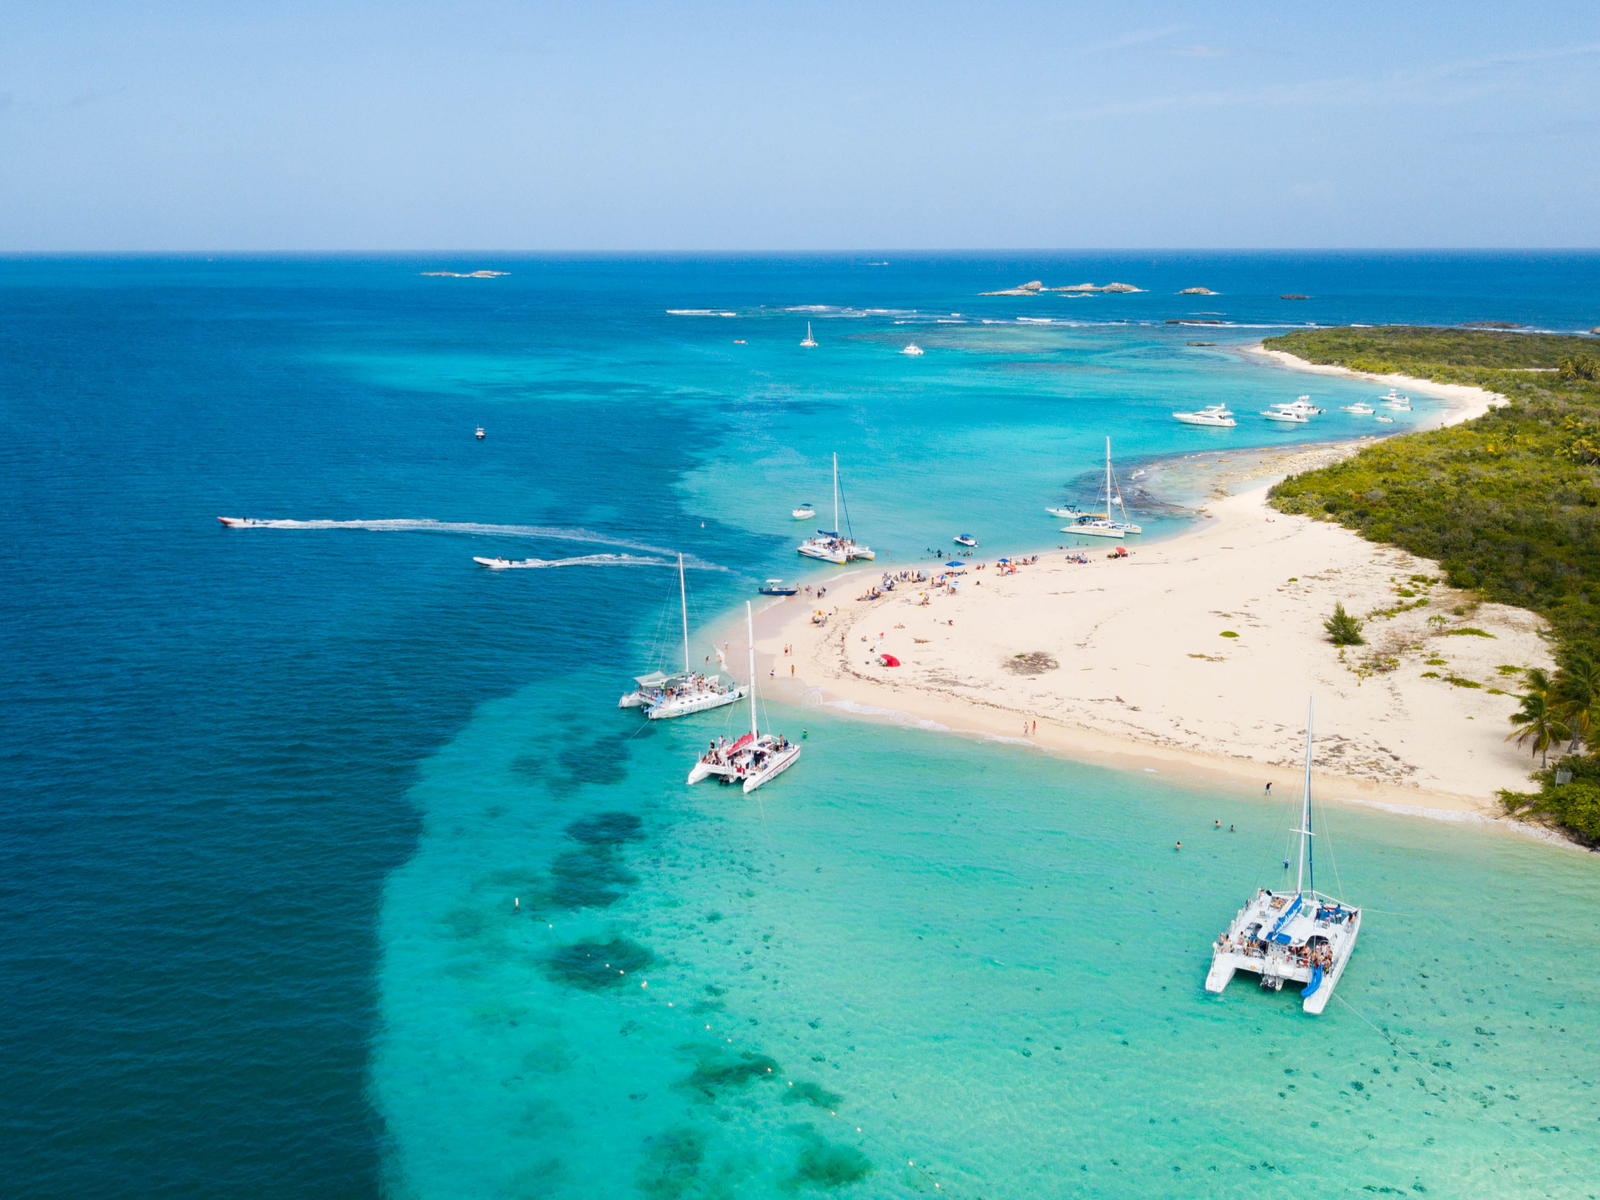 Passenger boats docked on the shallow clear water and two speedboats rushing at a distance from the isolated island of Cayo Icacos. considered one of the best places to visit in Puerto Rico